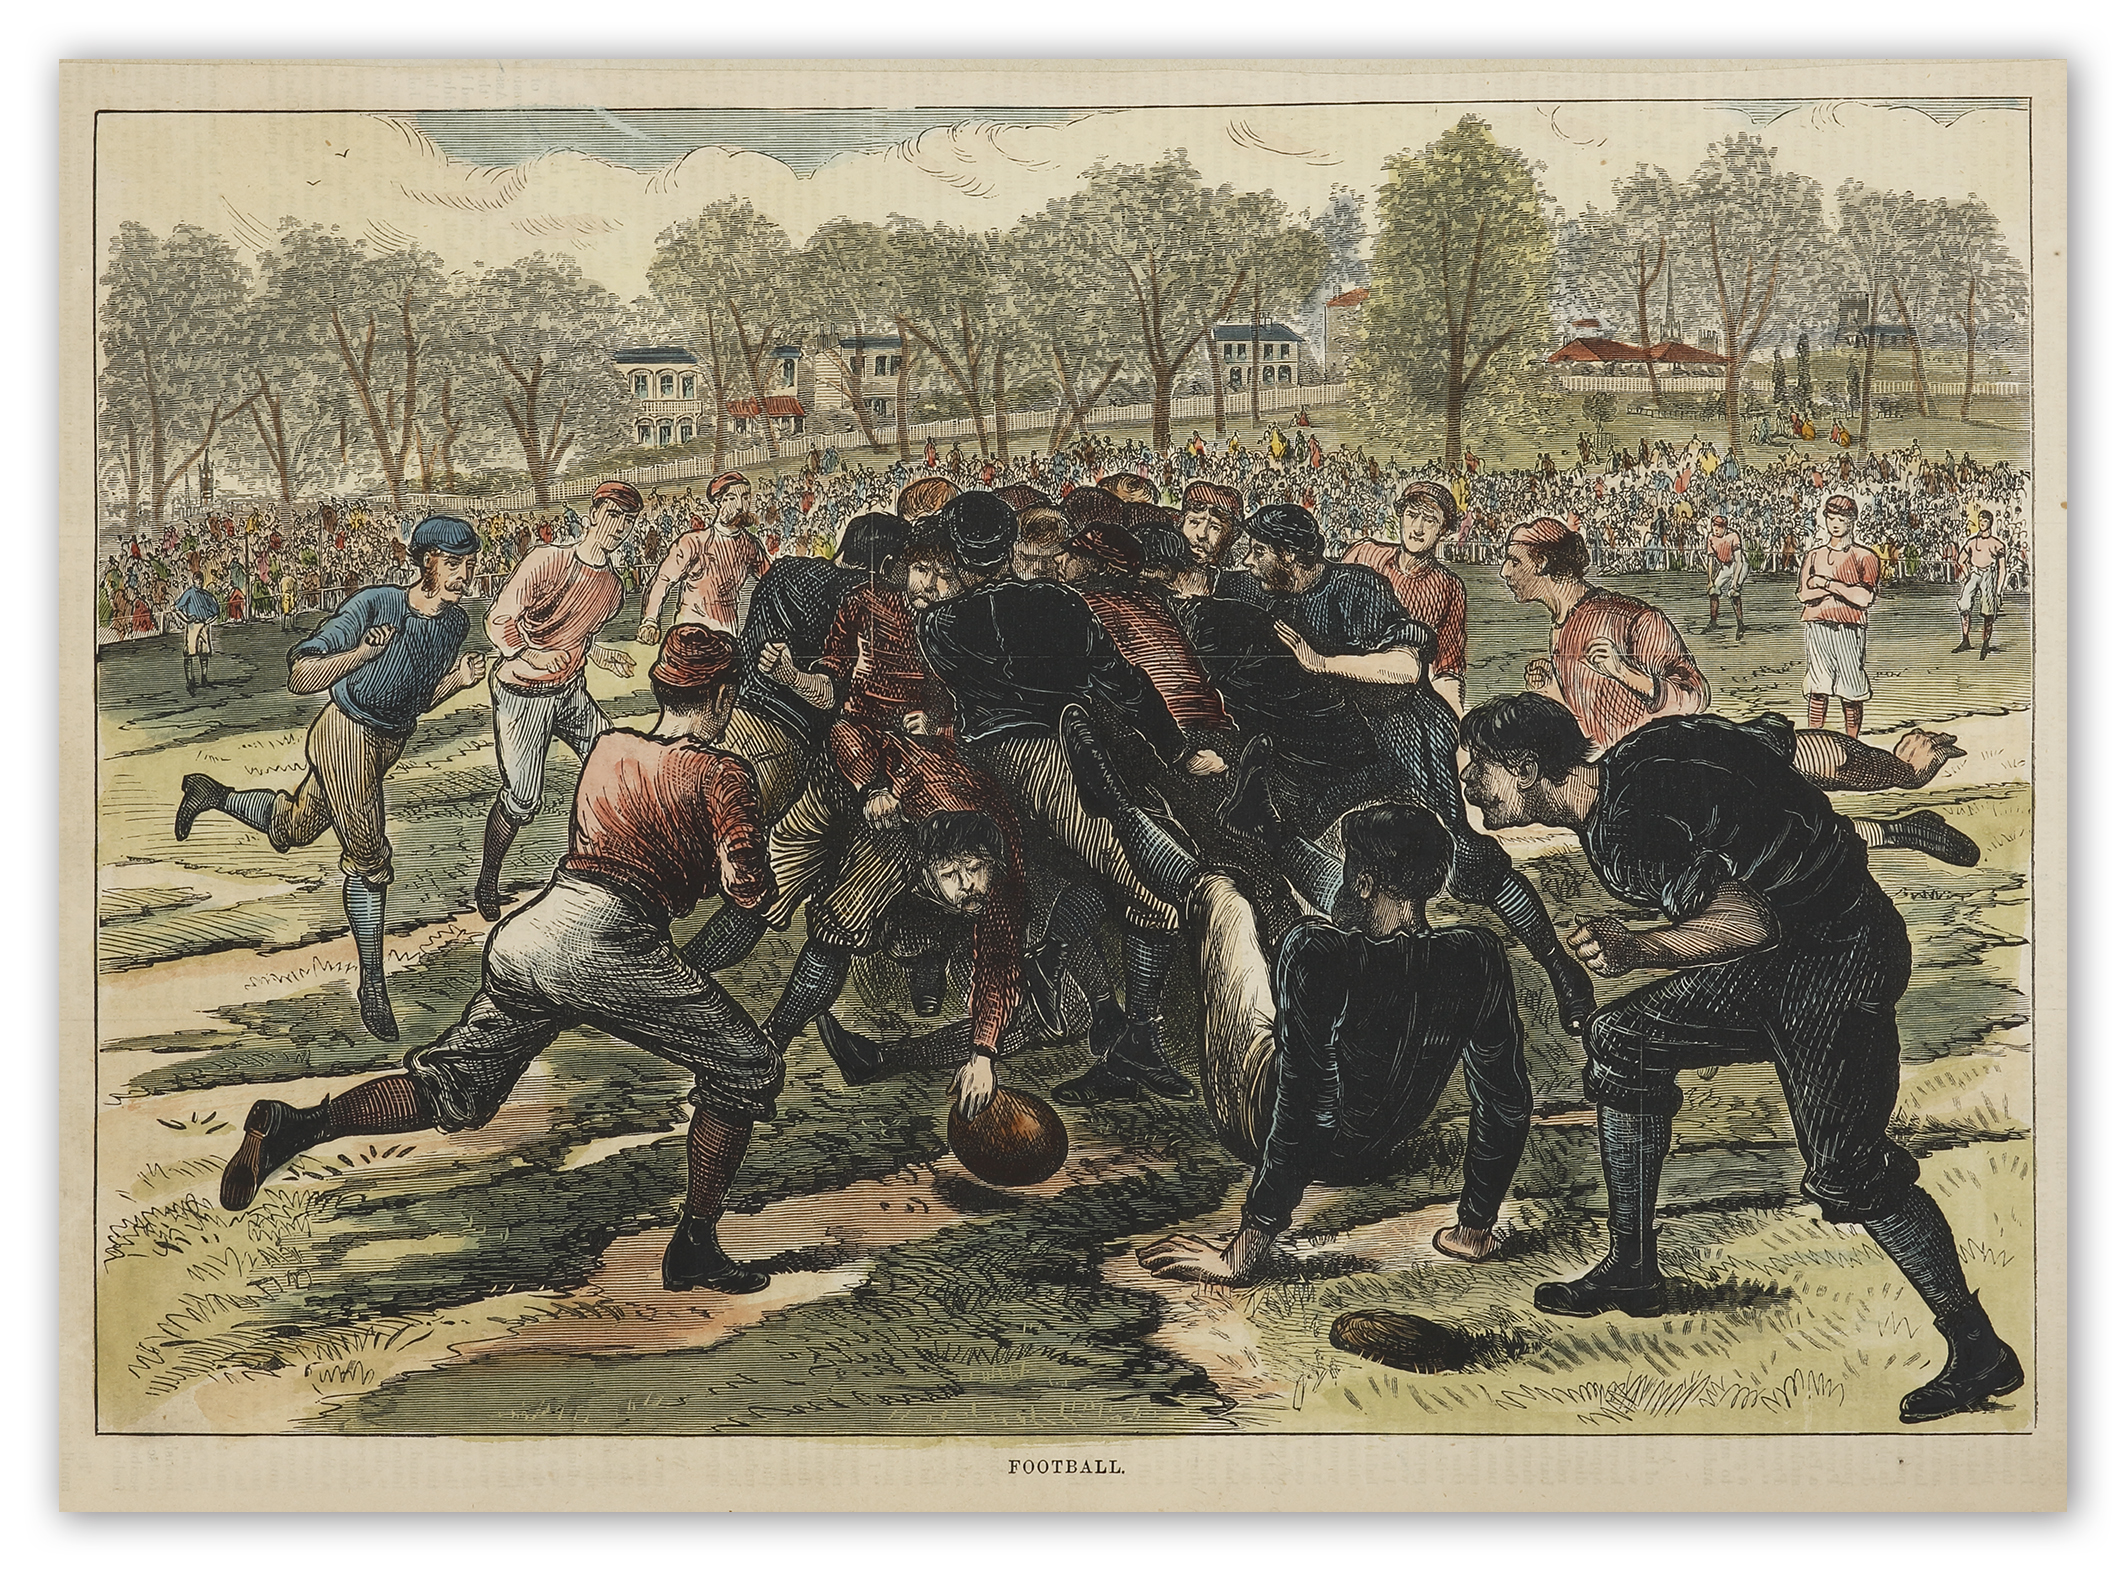 Football. - Antique Print from 1875